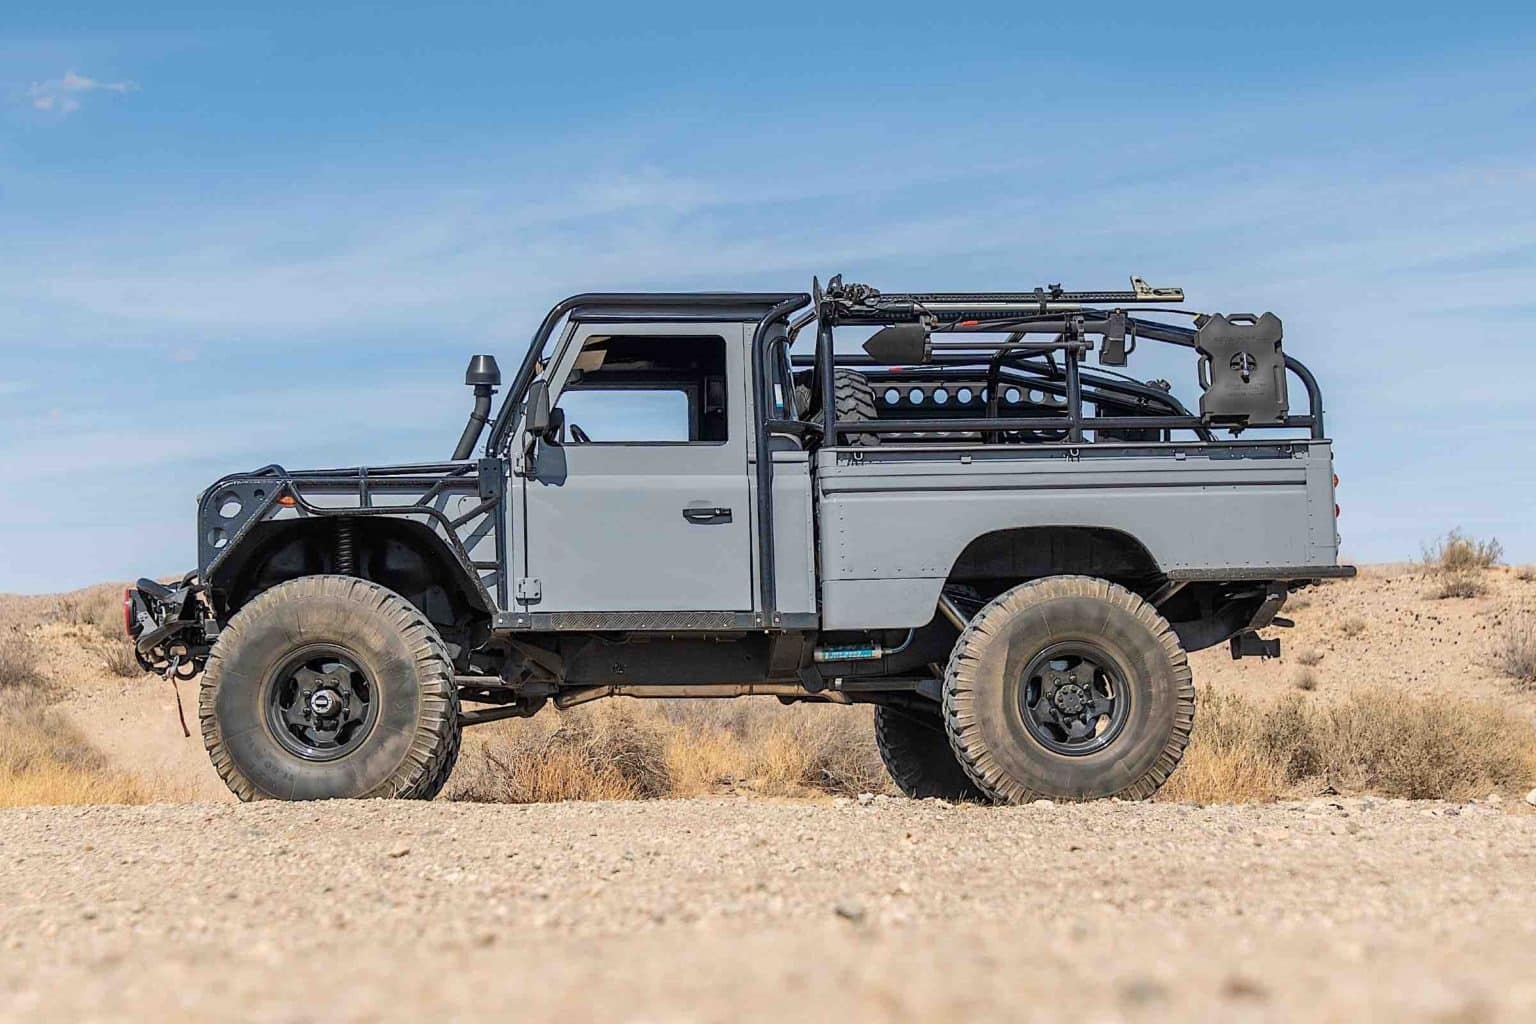 1984 Land Rover Defender 110 ready for whatever comes its way.